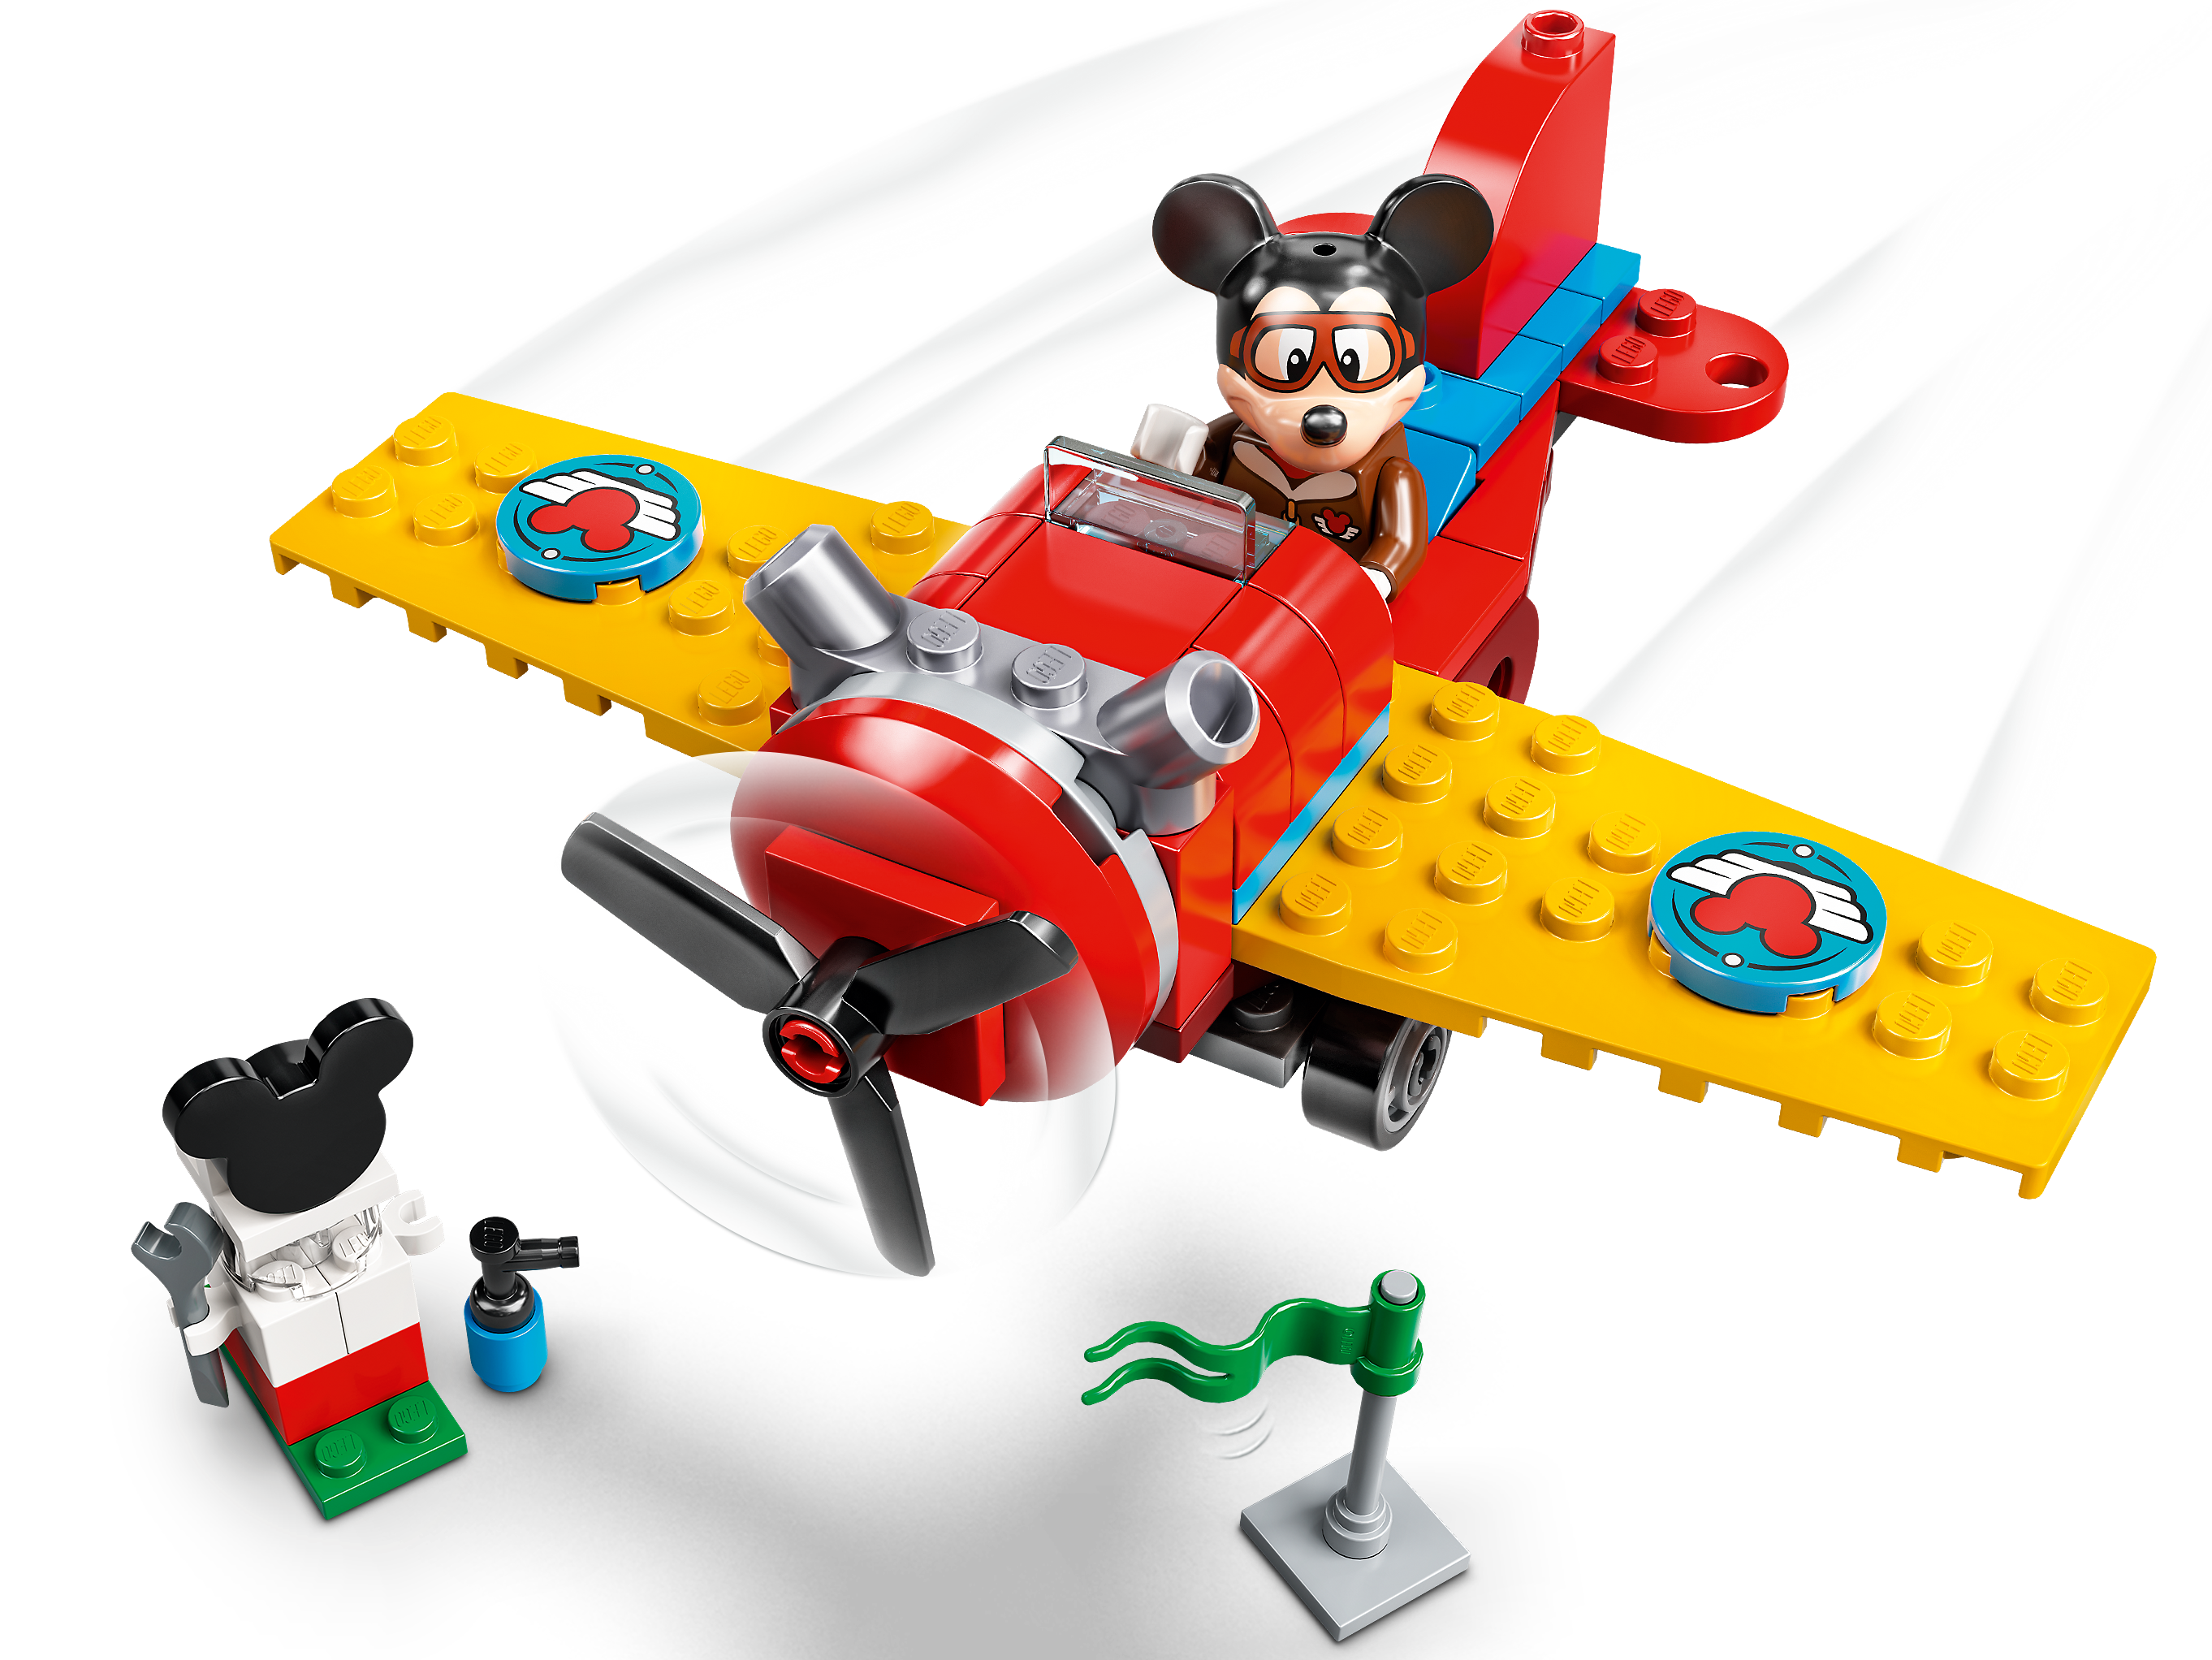 LEGO IDEAS - Mickey Mouse Clubhouse